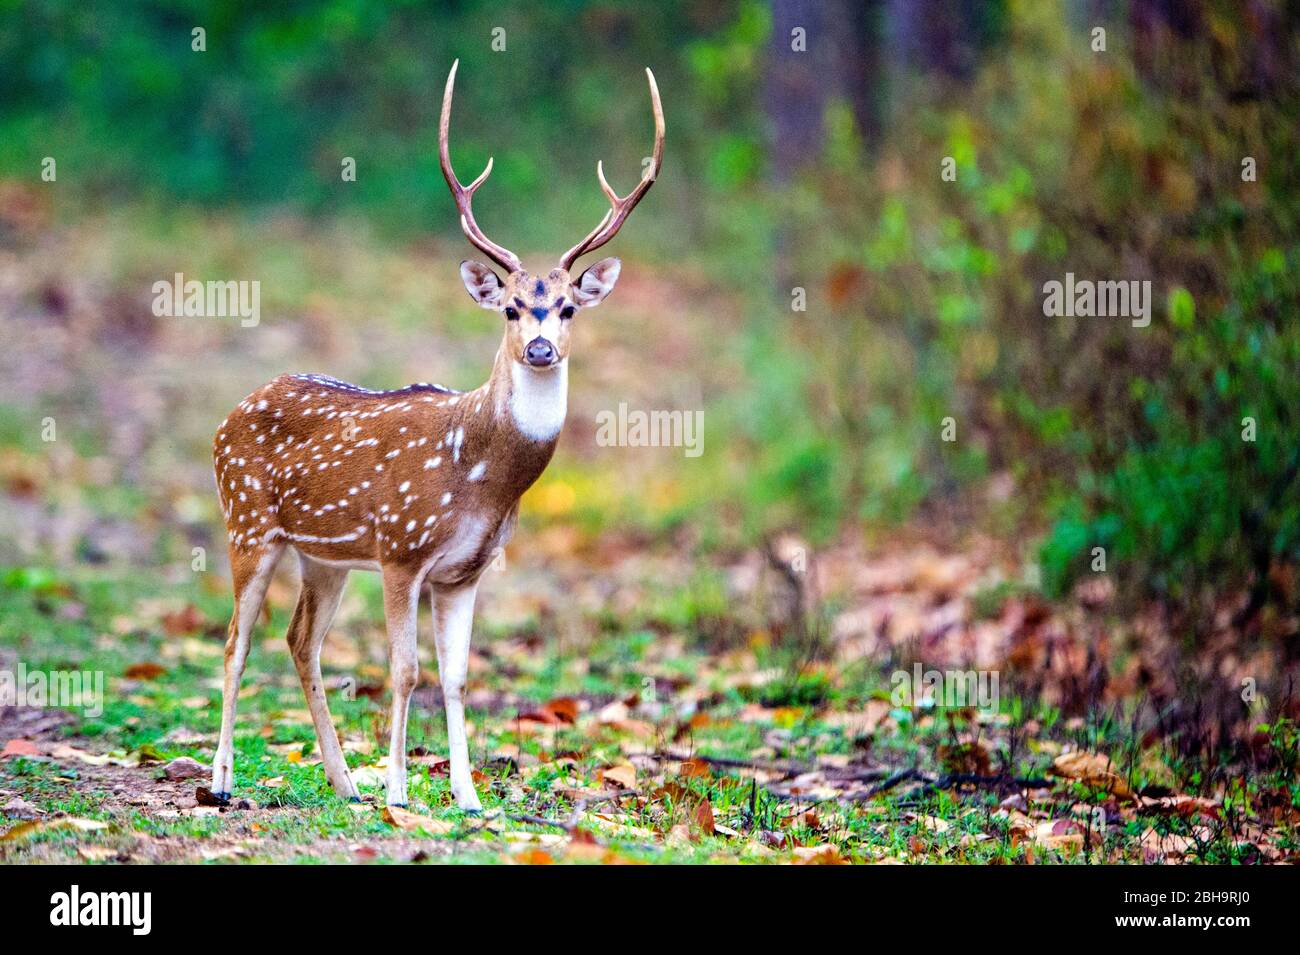 Spotted deer looking at camera, India Stock Photo